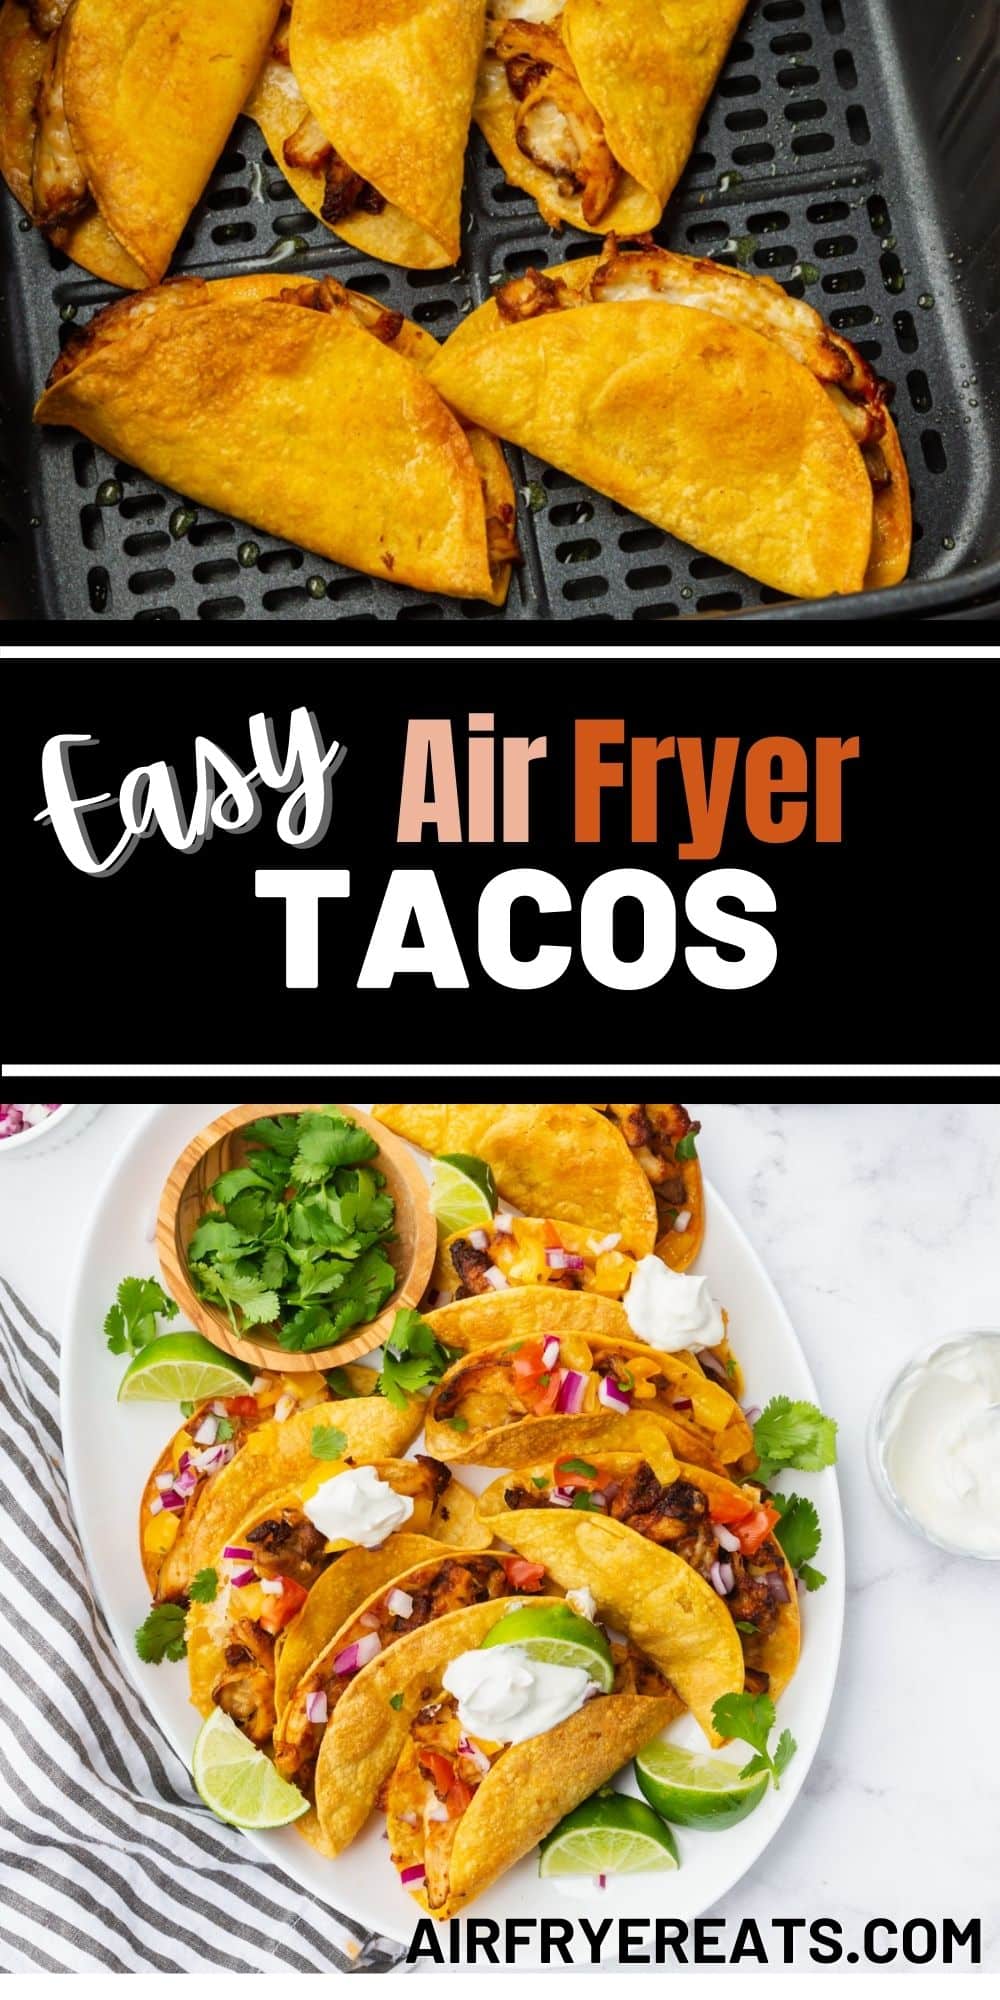 Make the best Air Fryer Tacos with this easy recipe, featuring perfectly seasoned shredded chicken thighs, melty cheese, and crispy air fried taco shells. via @vegetarianmamma